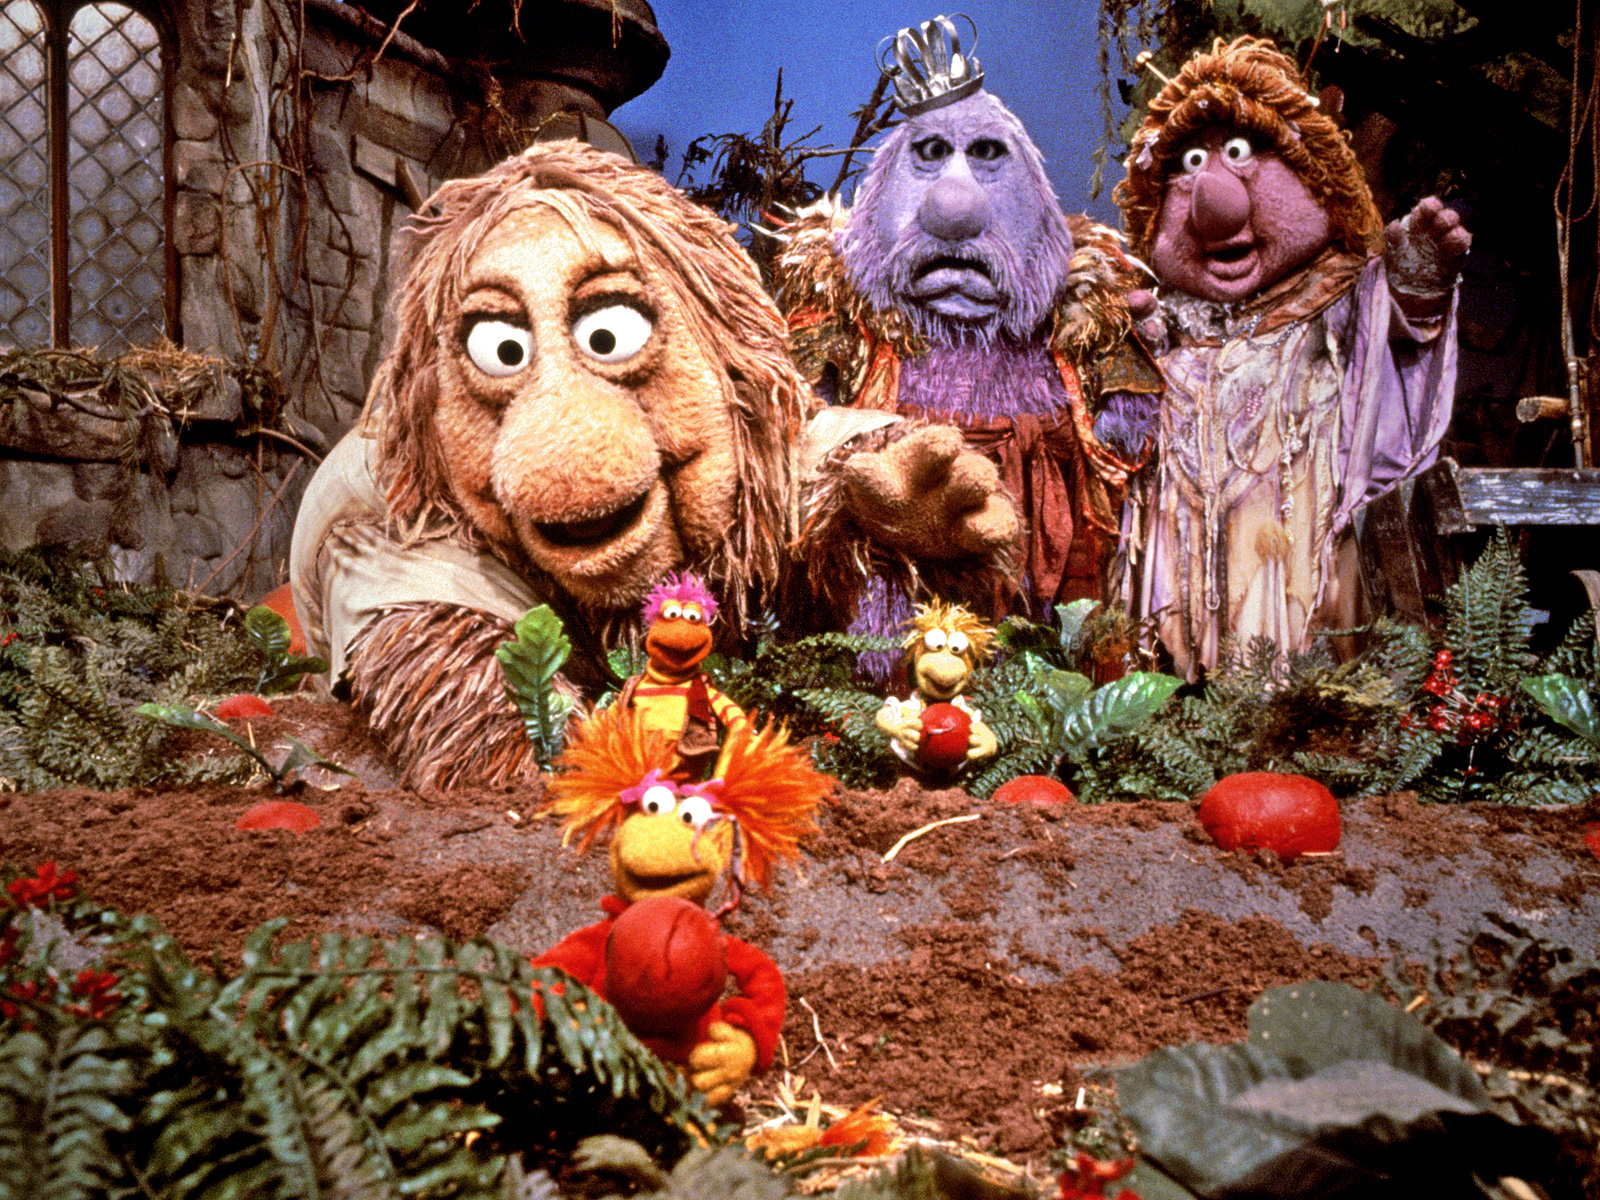 Fraggle Rock: Back to the Rock - Wikipedia